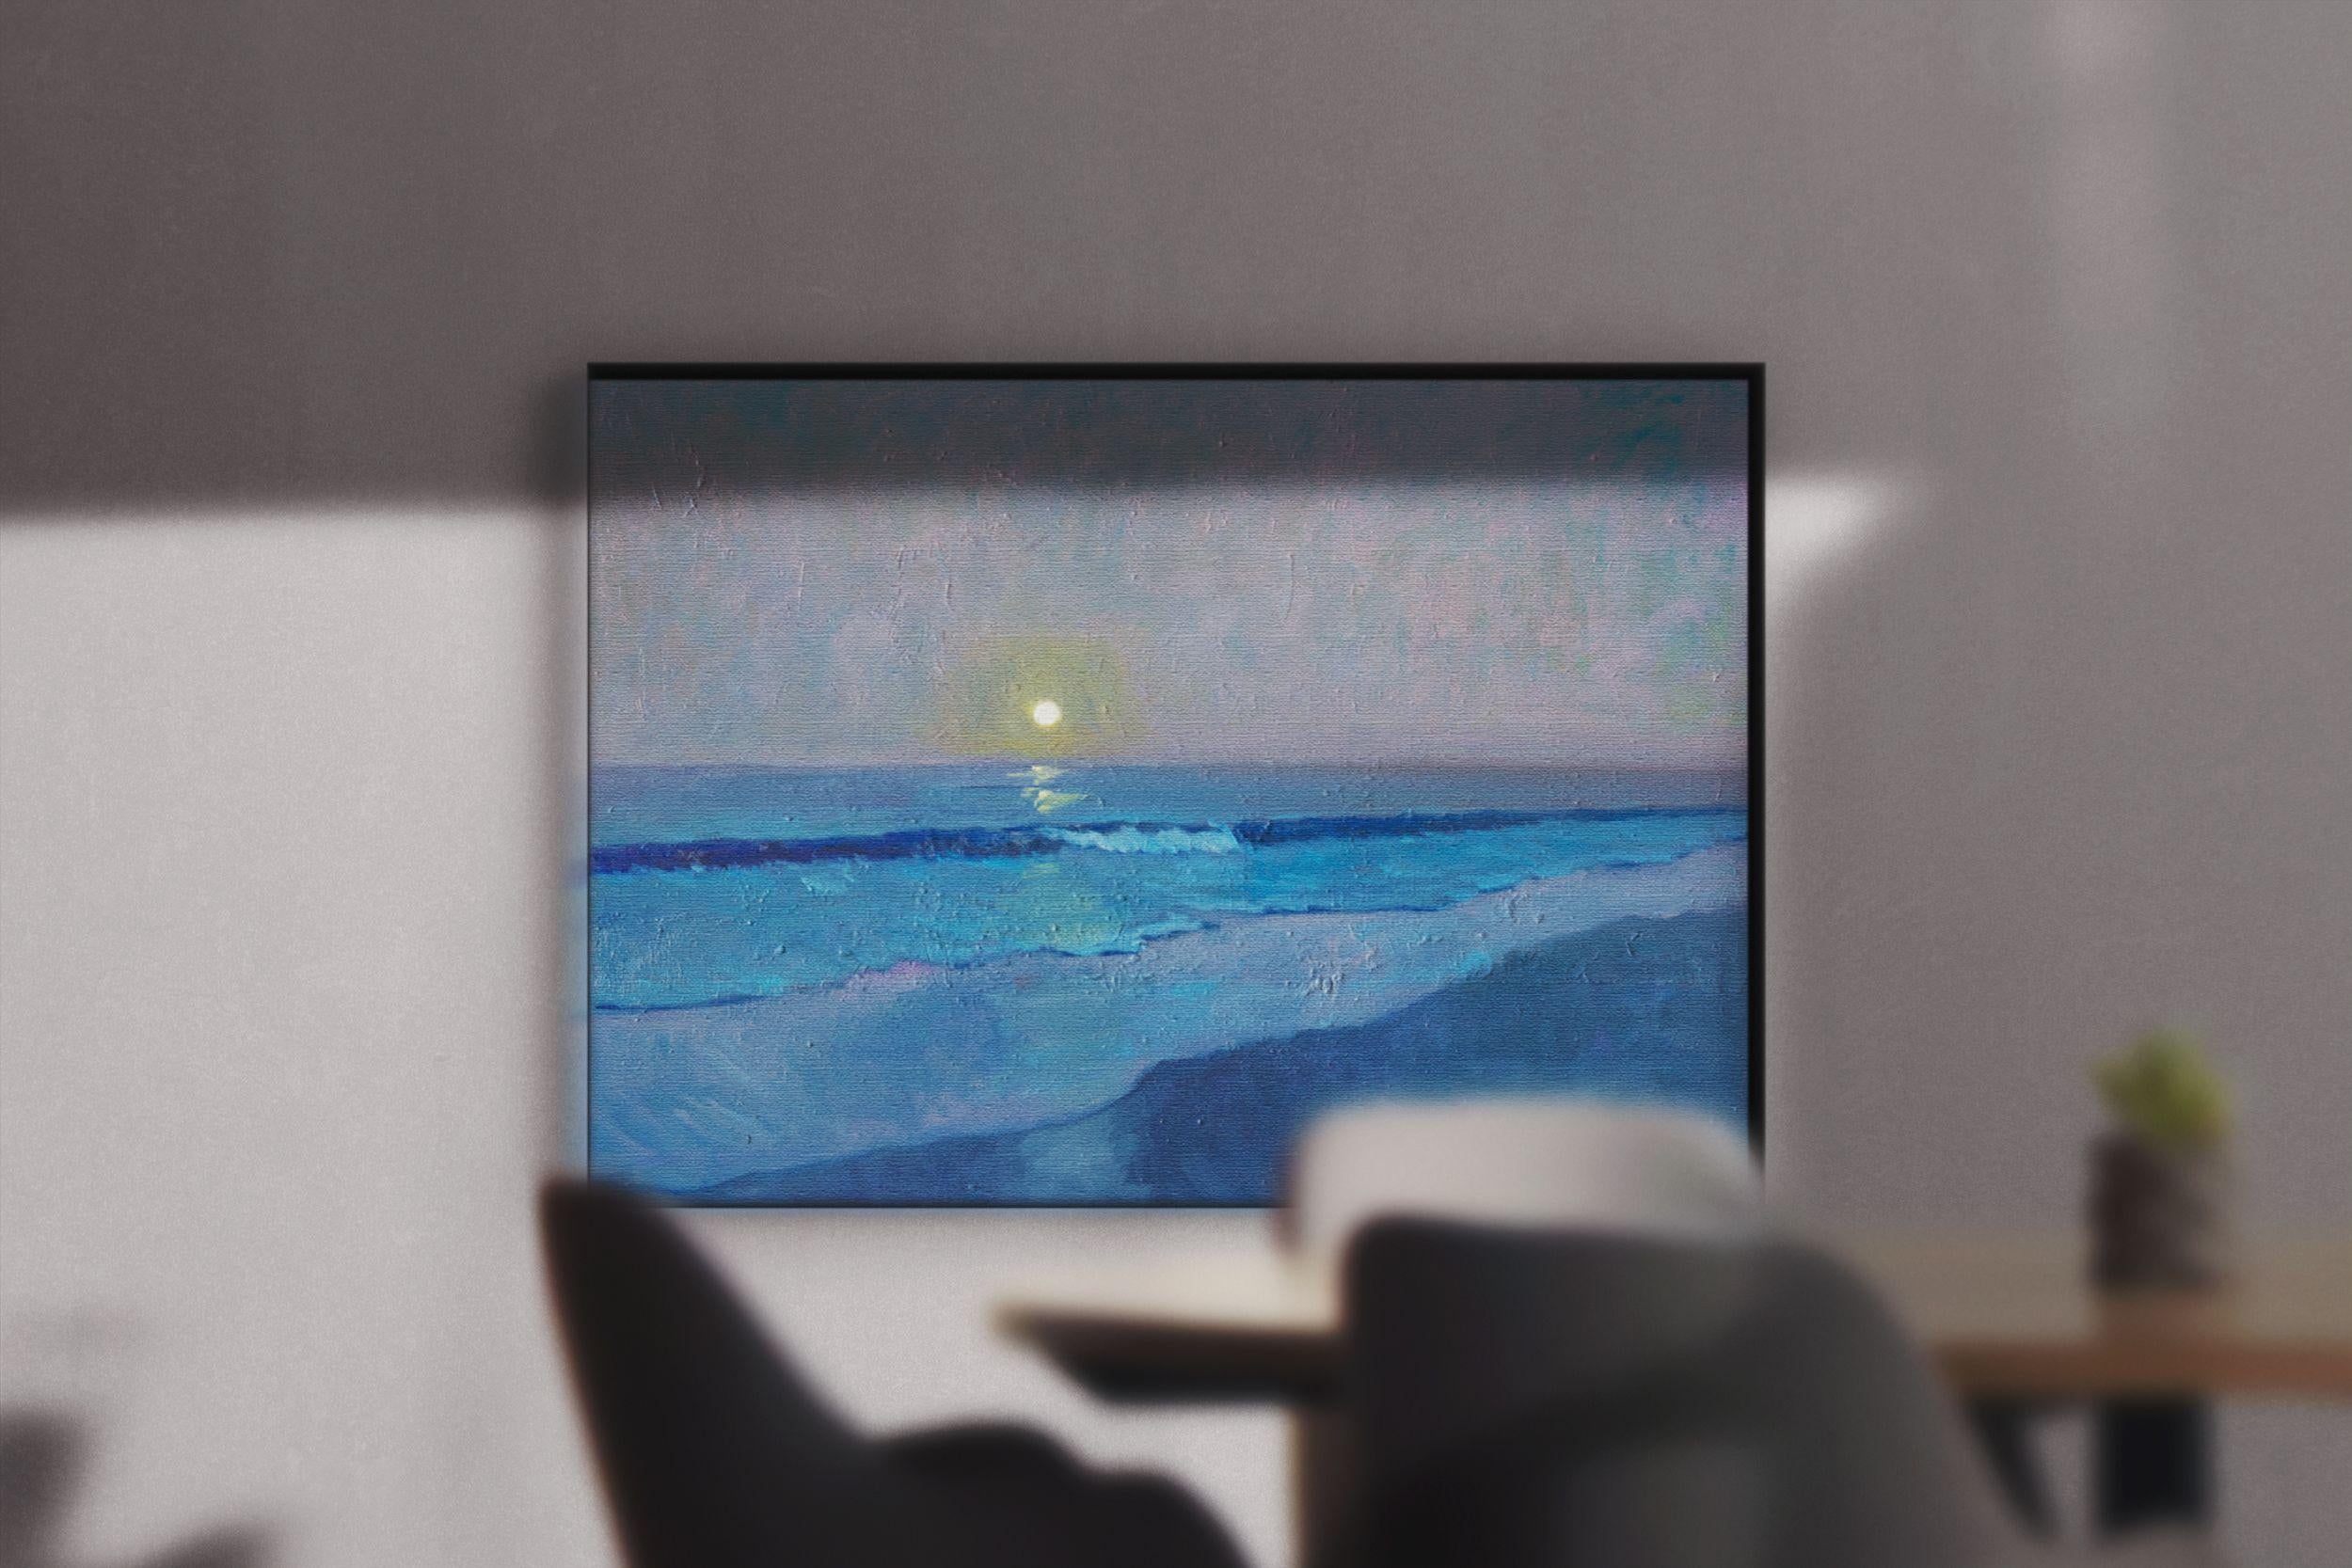 The work is an original abstract painting, an oil handmade on canvas. This series of paintings is the result of over 13 years of studying landscapes from life. Mounting the easel and the canvas outside, I tried to capture the light effects I have in